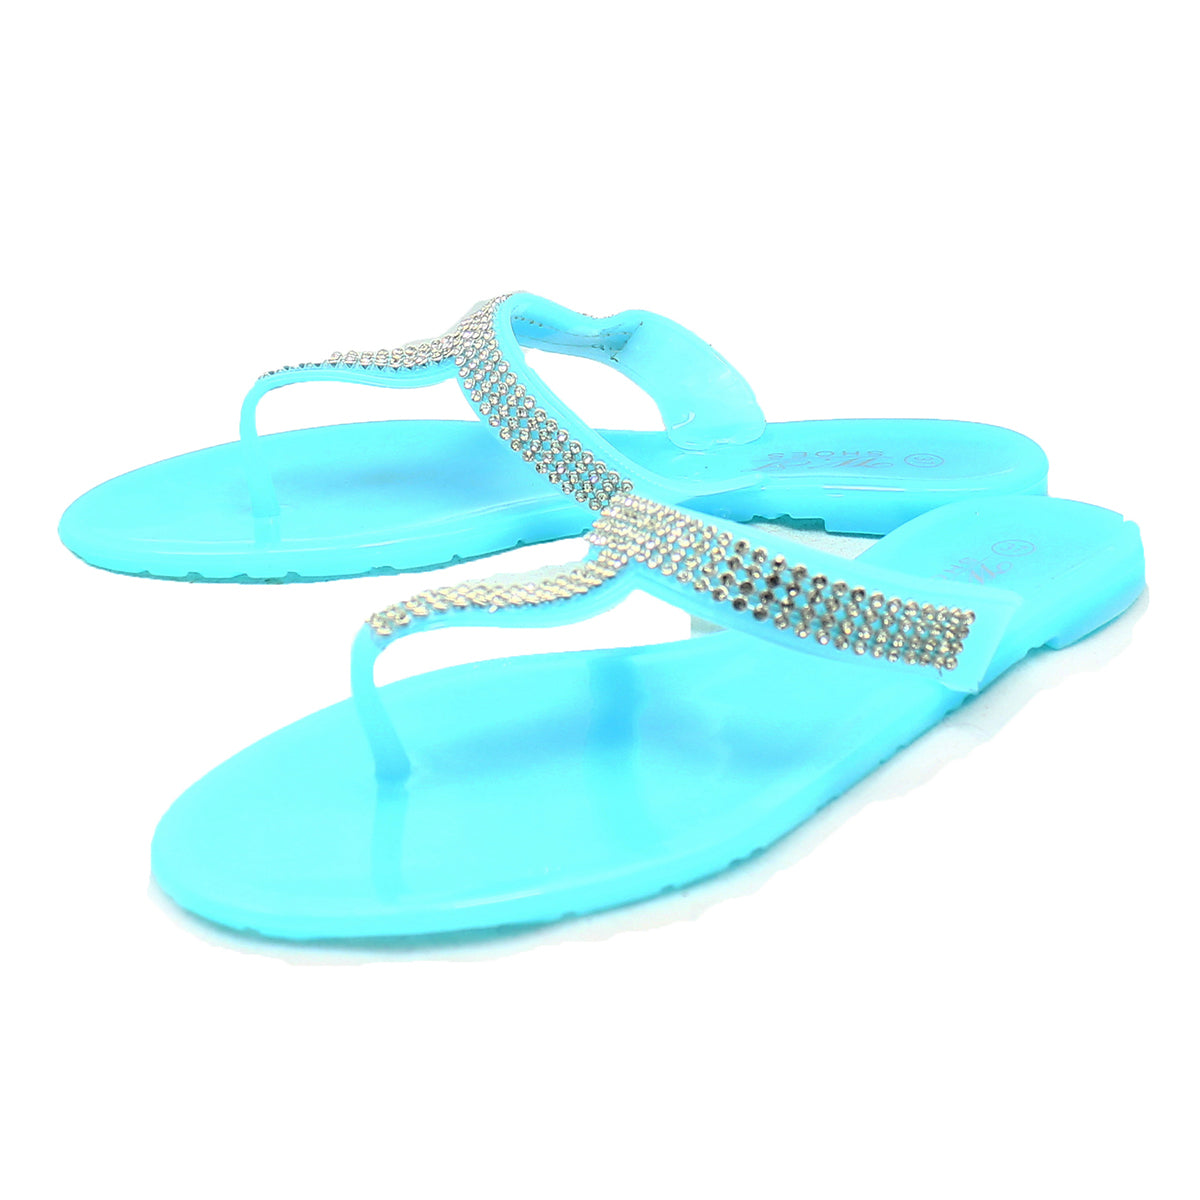 Jelly Sandals / Flip Flops with sparkly T-Bar